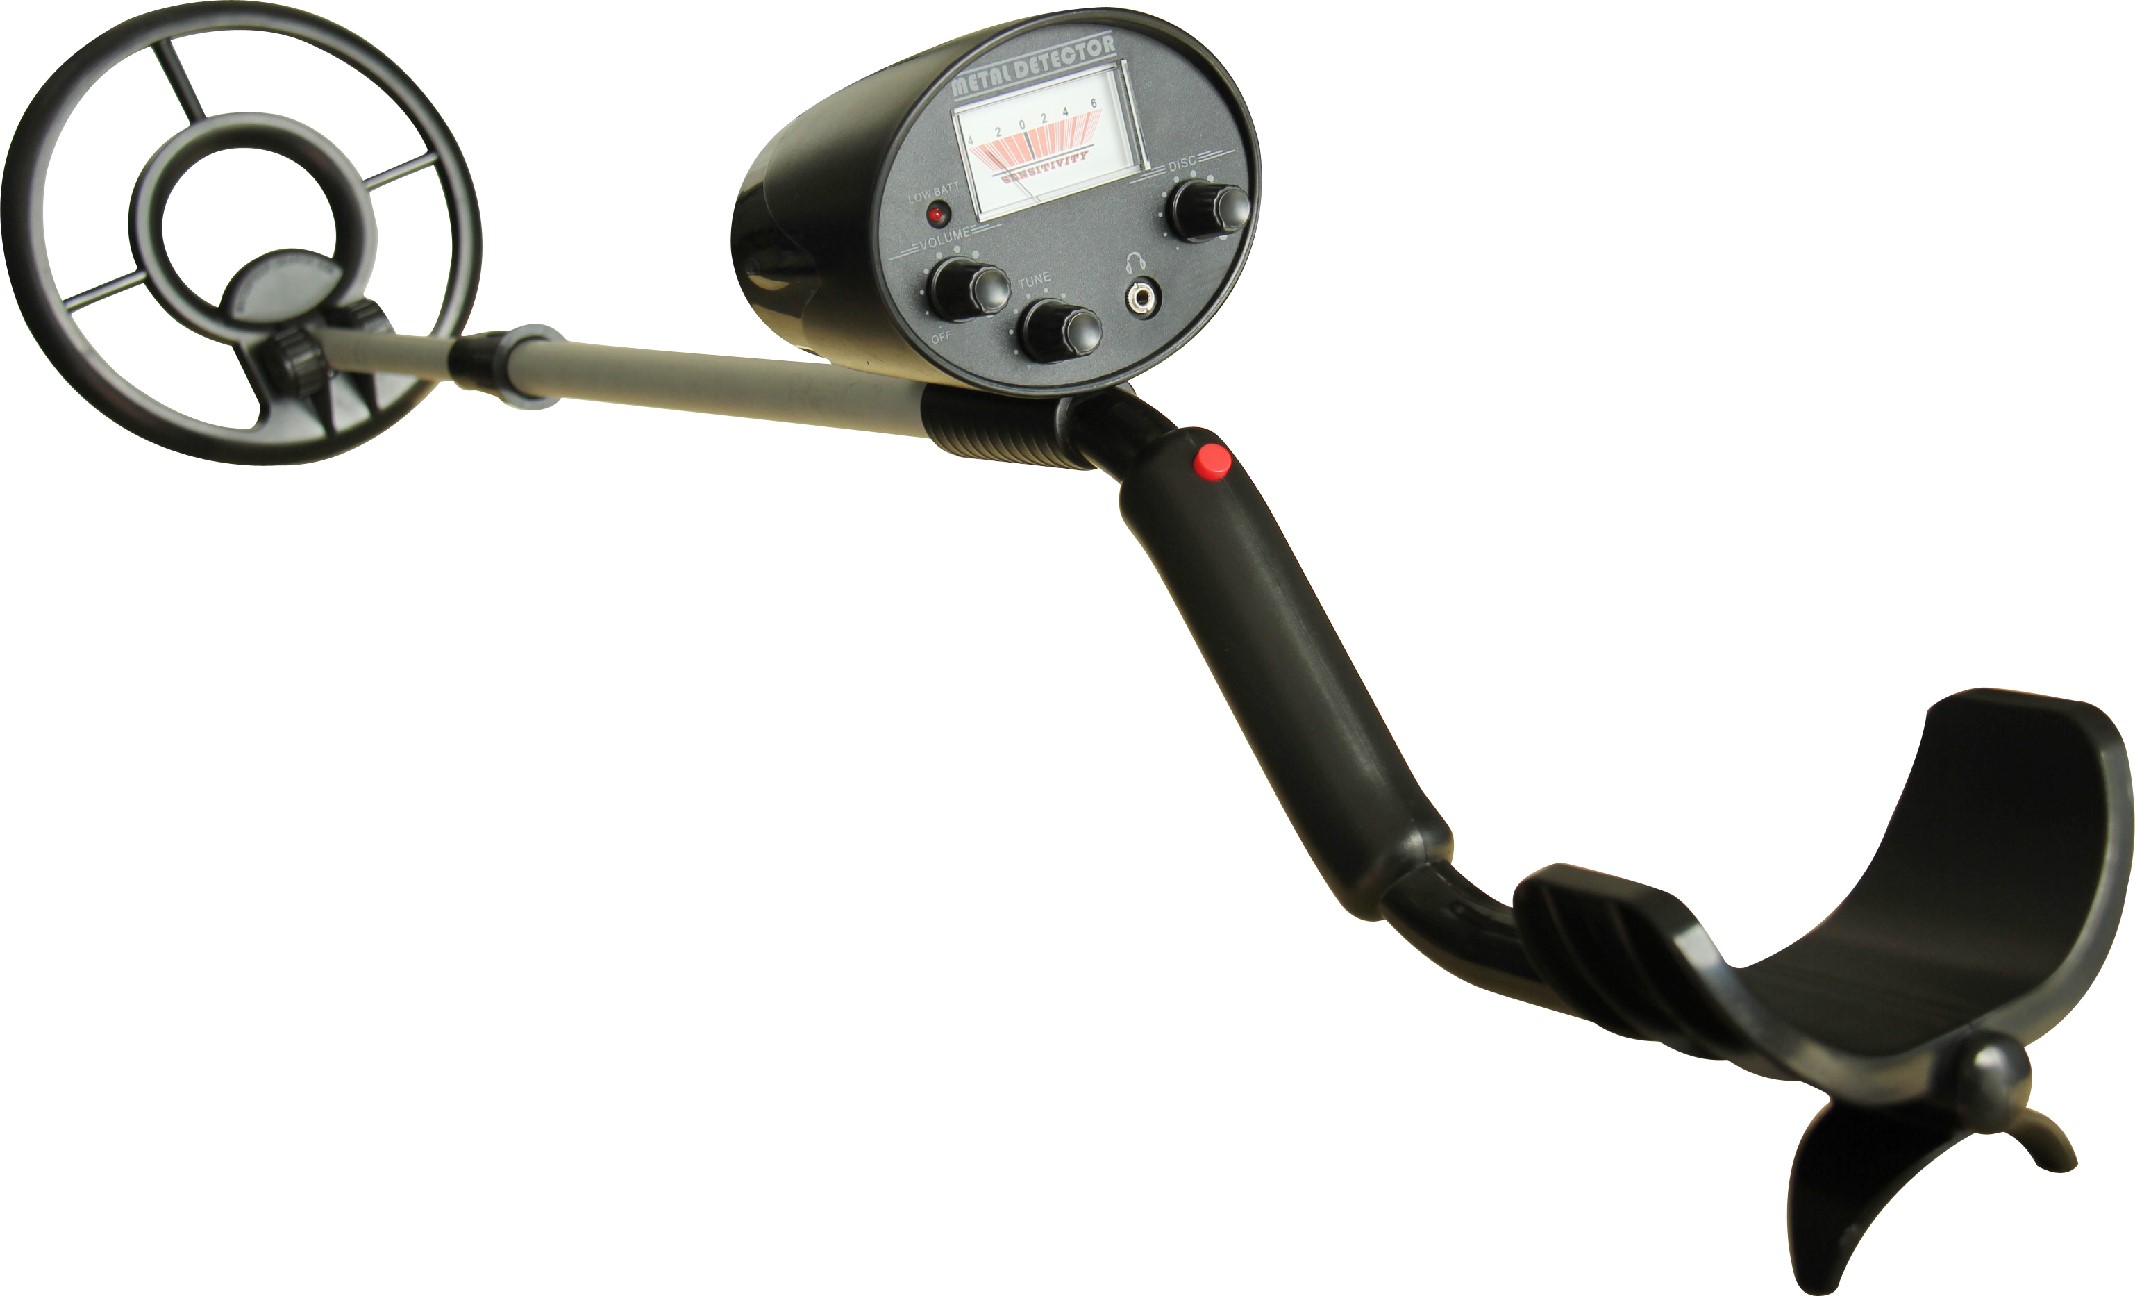 Sell metal detector for children with screen